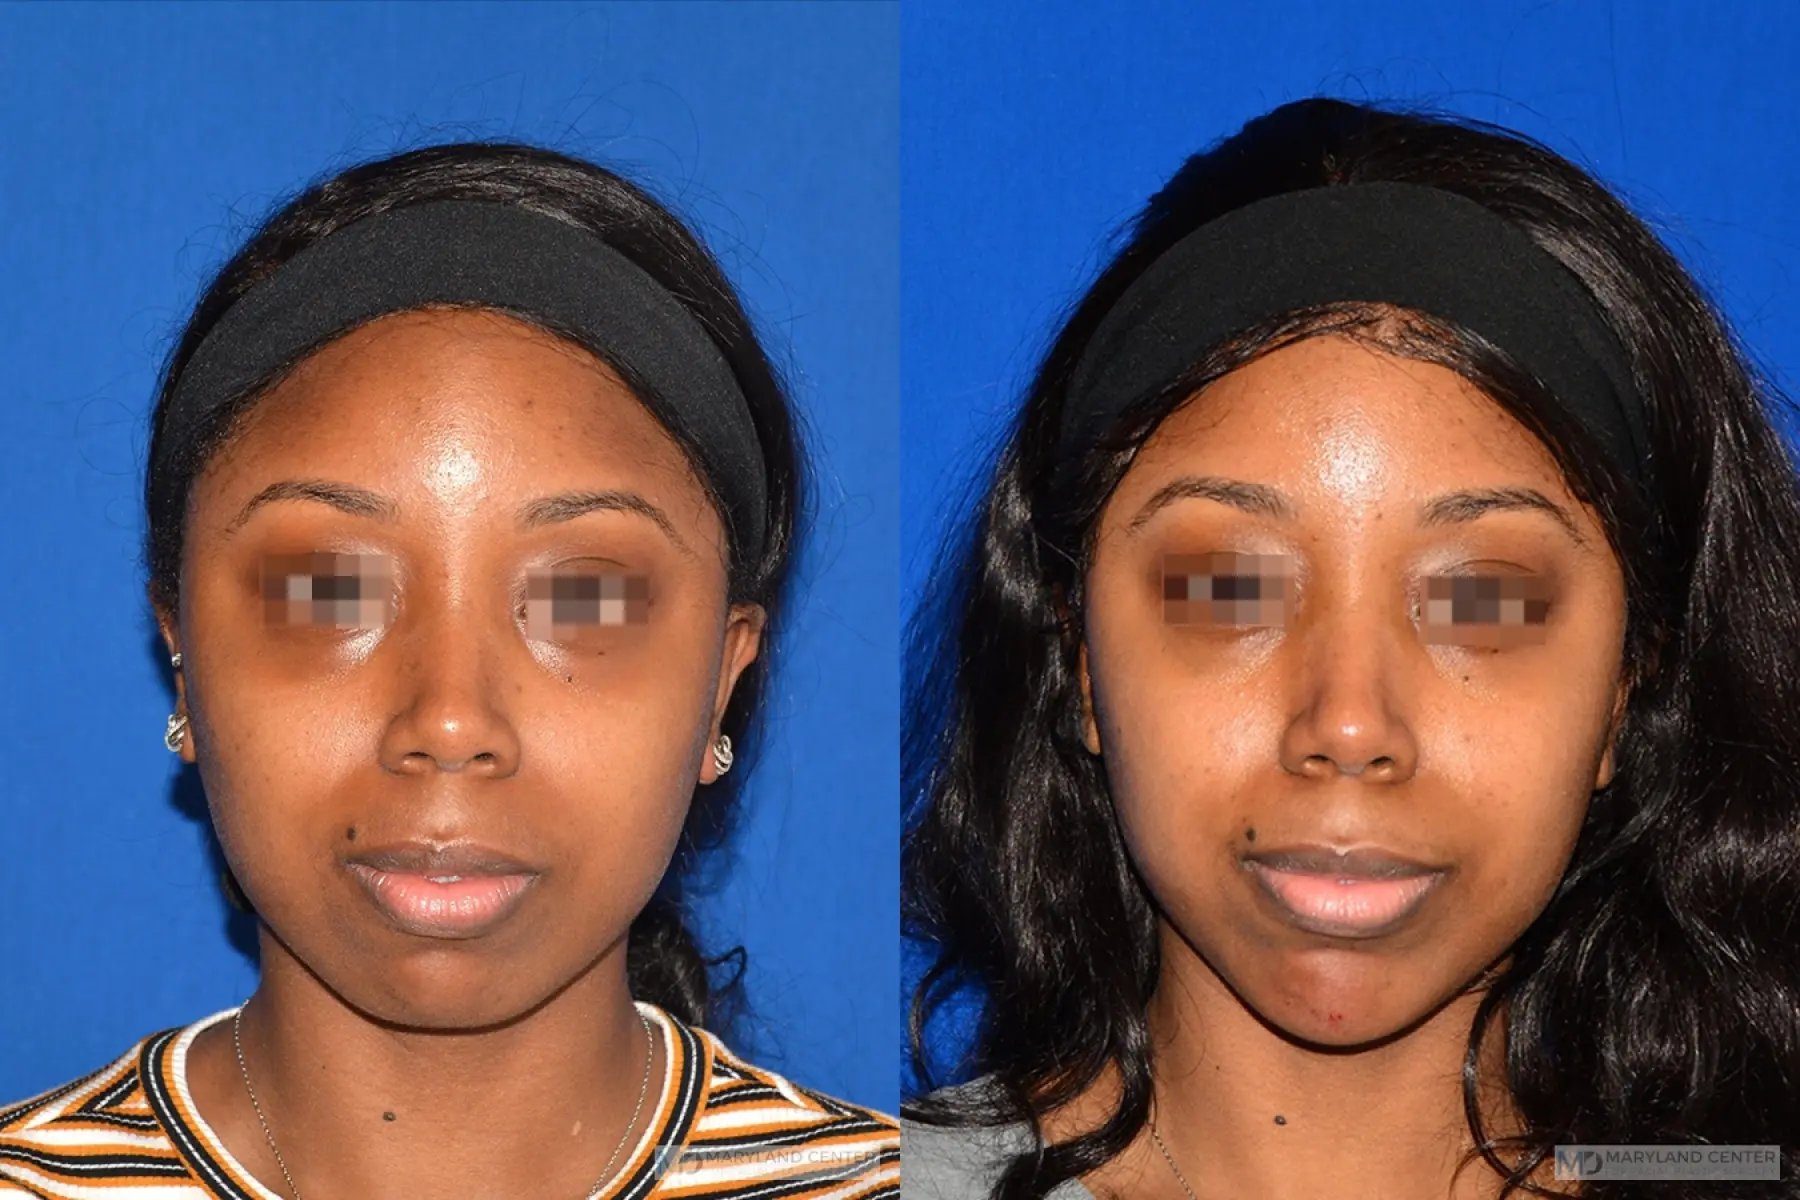 Chin Implant Before And After Kzpzmj716409 Highres.webp